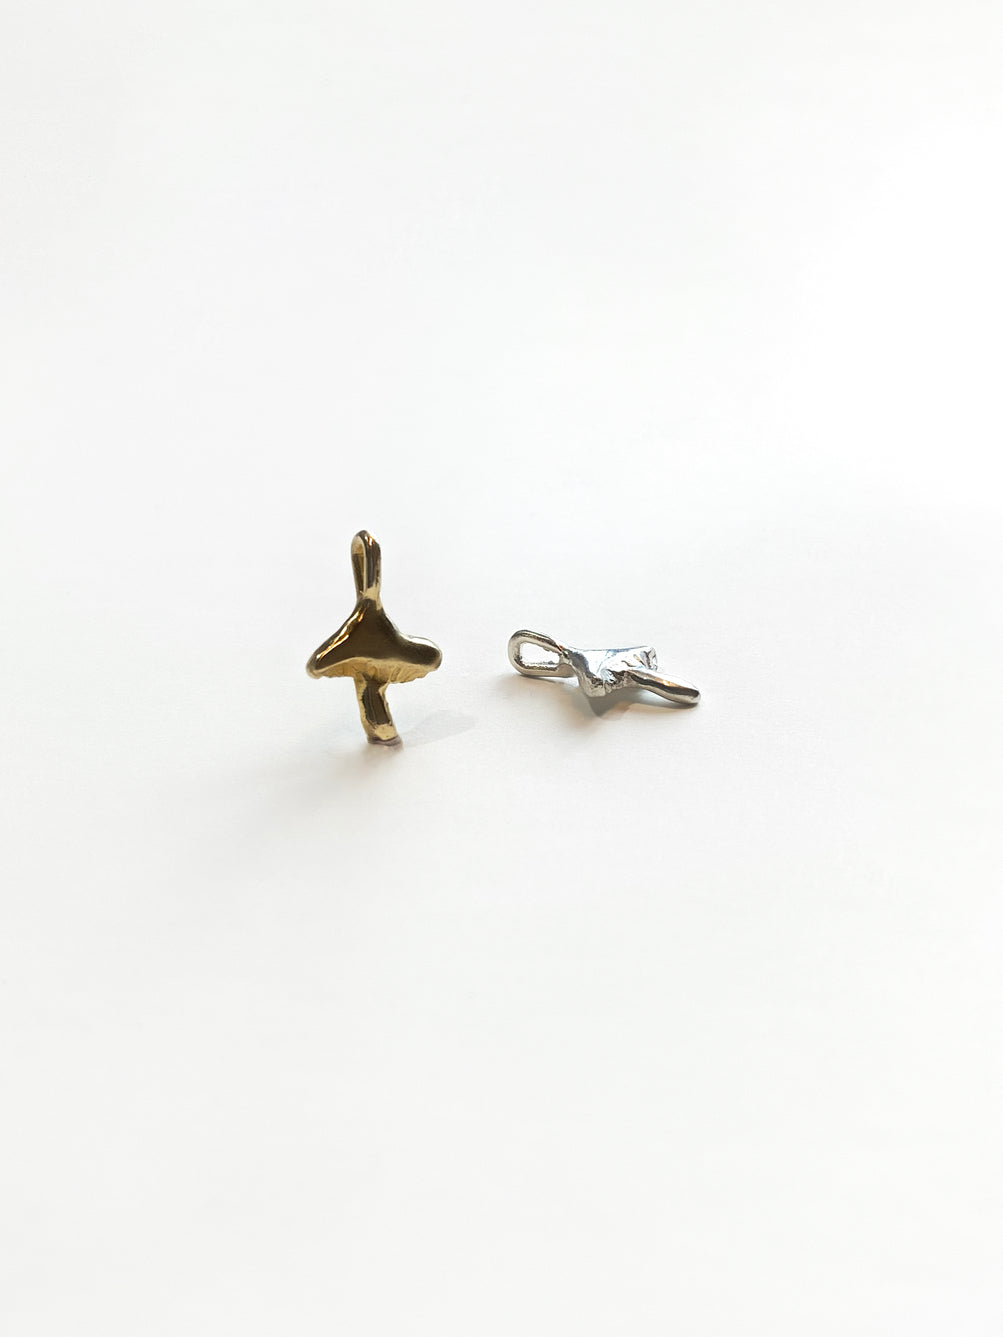 Gold and silver mushroom charms on white background